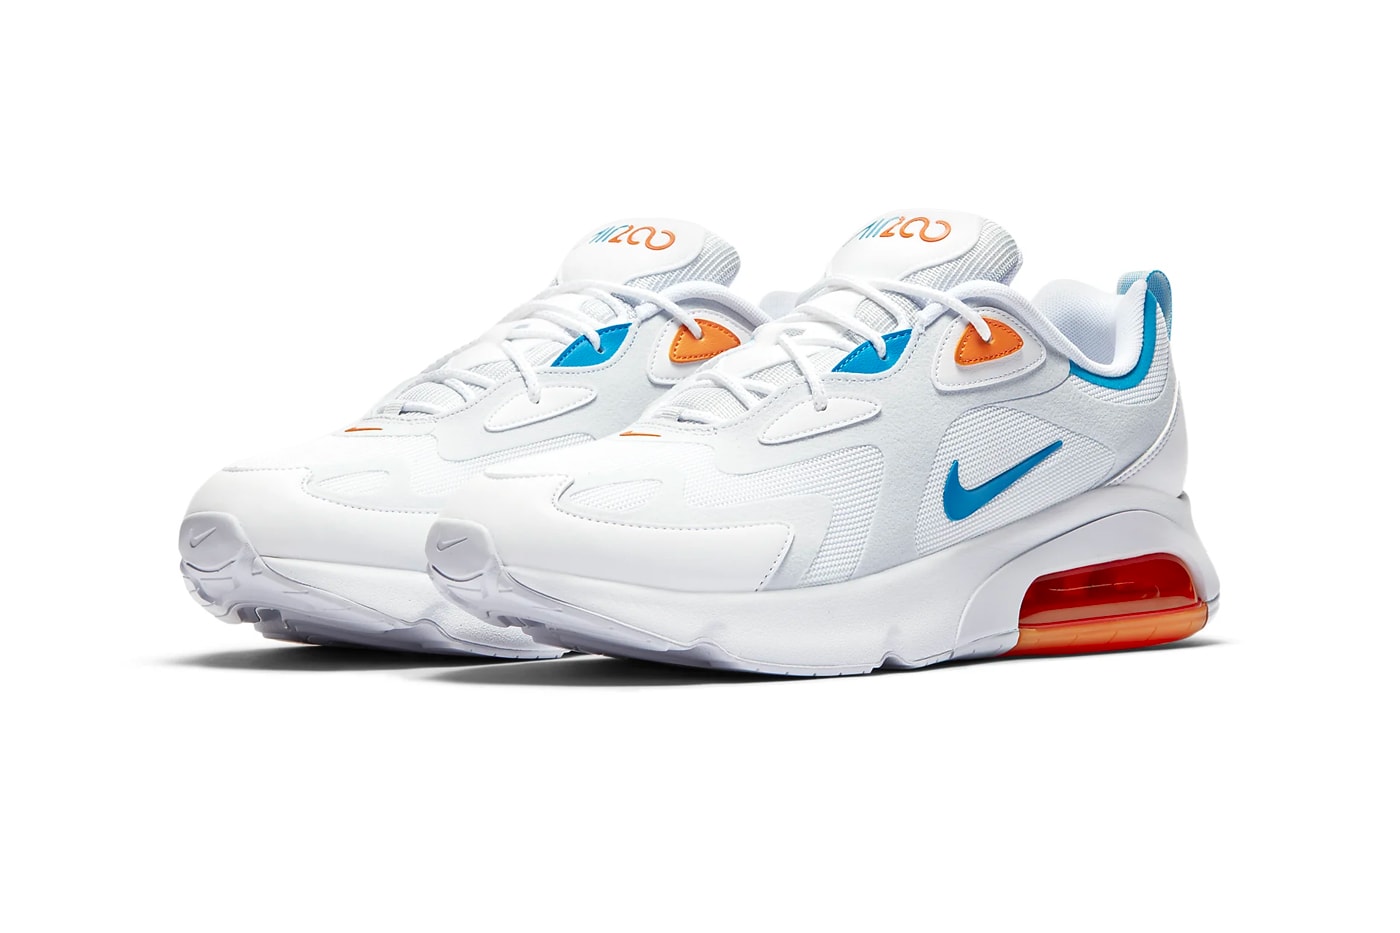 Nike Air Max 200 White Laser Blue Football Gray Bombay CT1262 001 Miami Dolphins Color sneakers footwear shoes menswear streetwear spring summer 2020 collection sneakers trainers